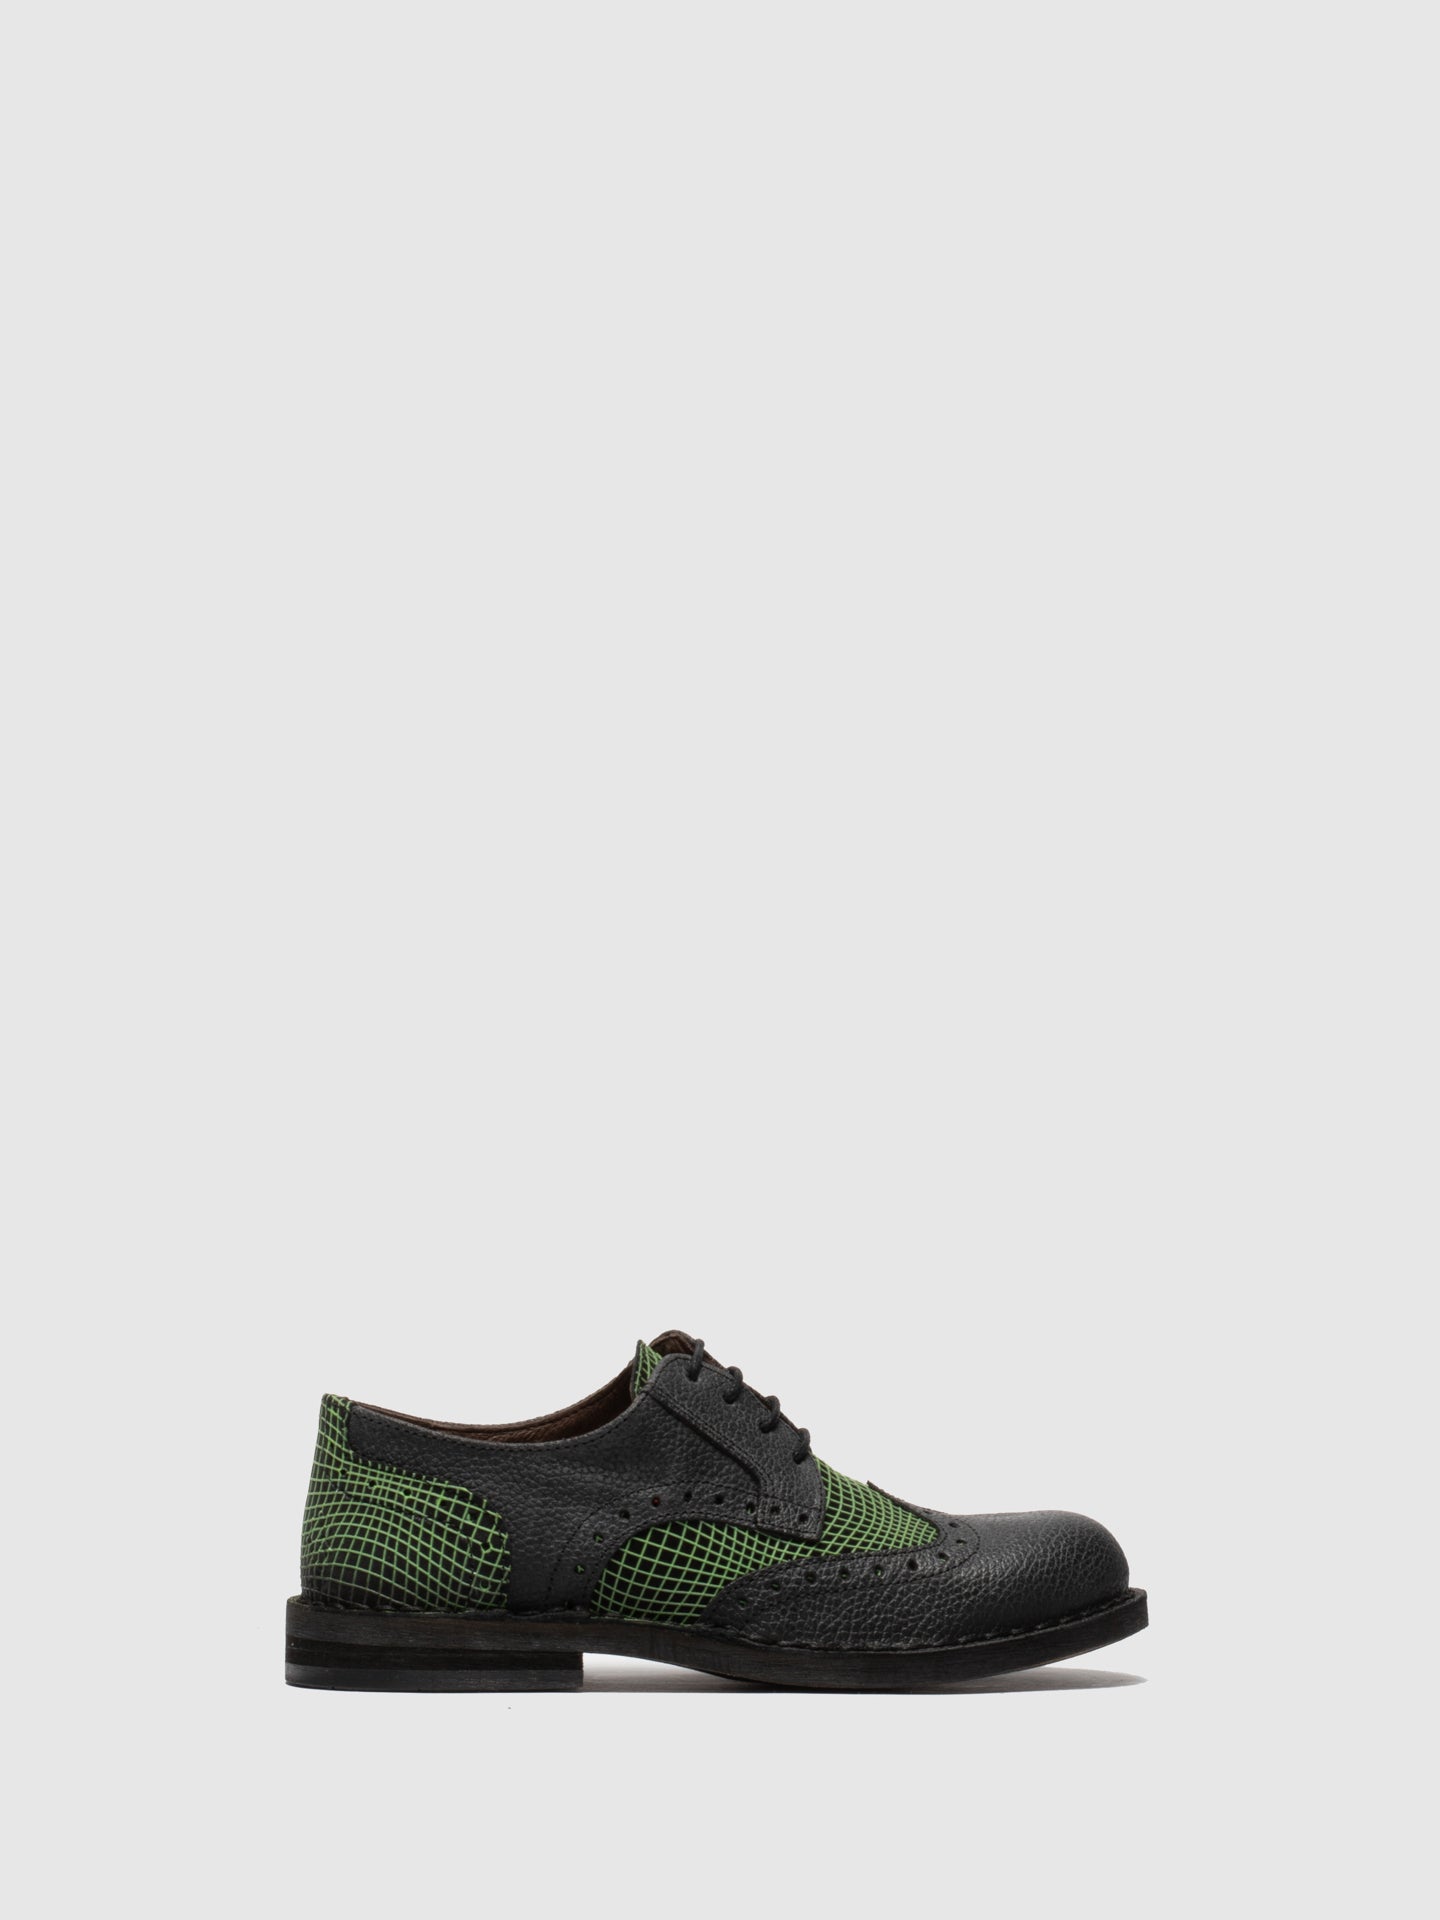 Fly London Green Black Derby Shoes